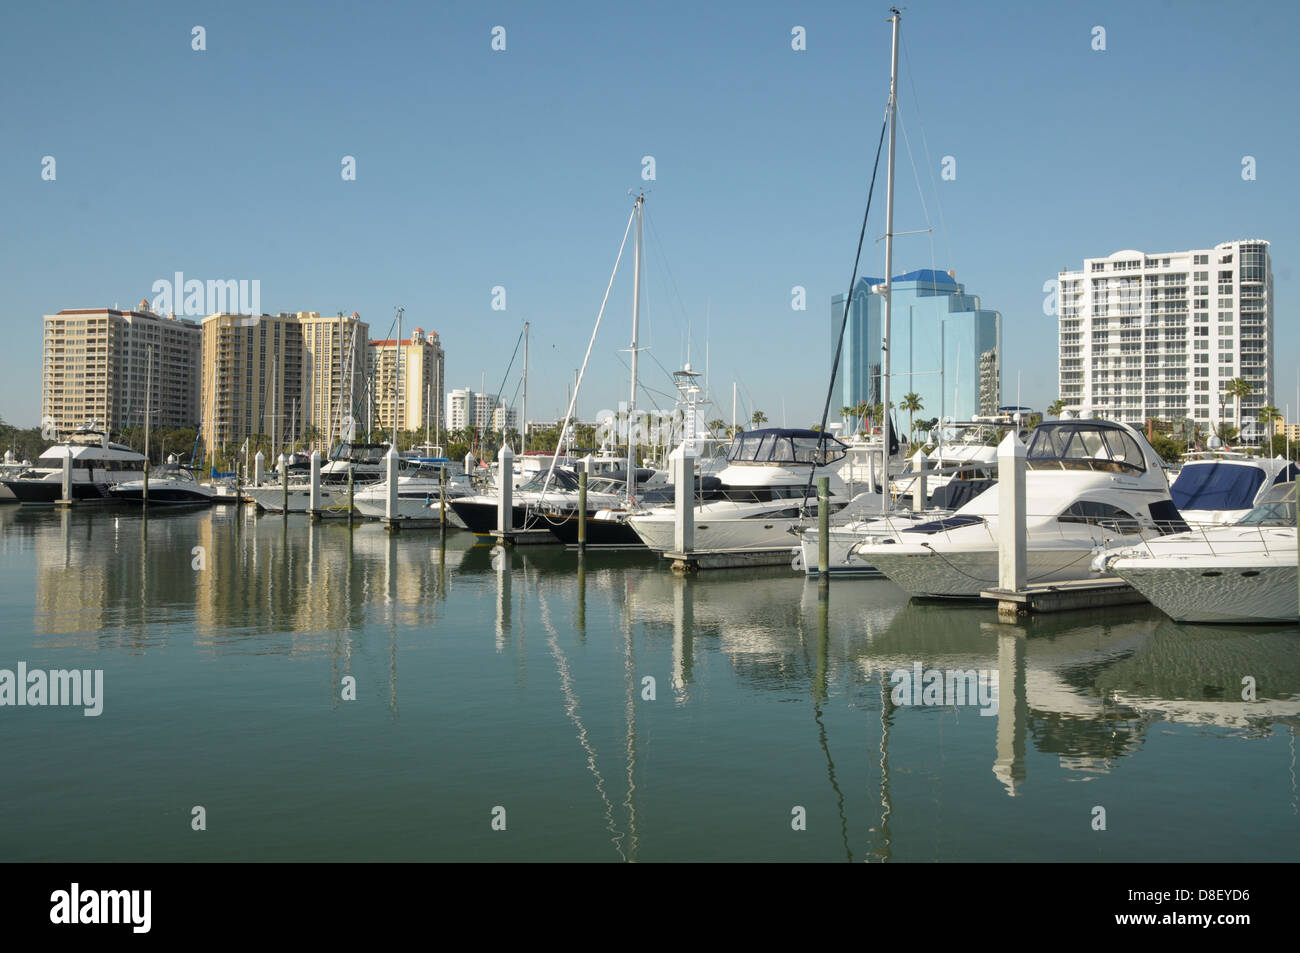 A flotilla of boats is moored at the Sarasota, Florida bay with buildings in the background. Stock Photo